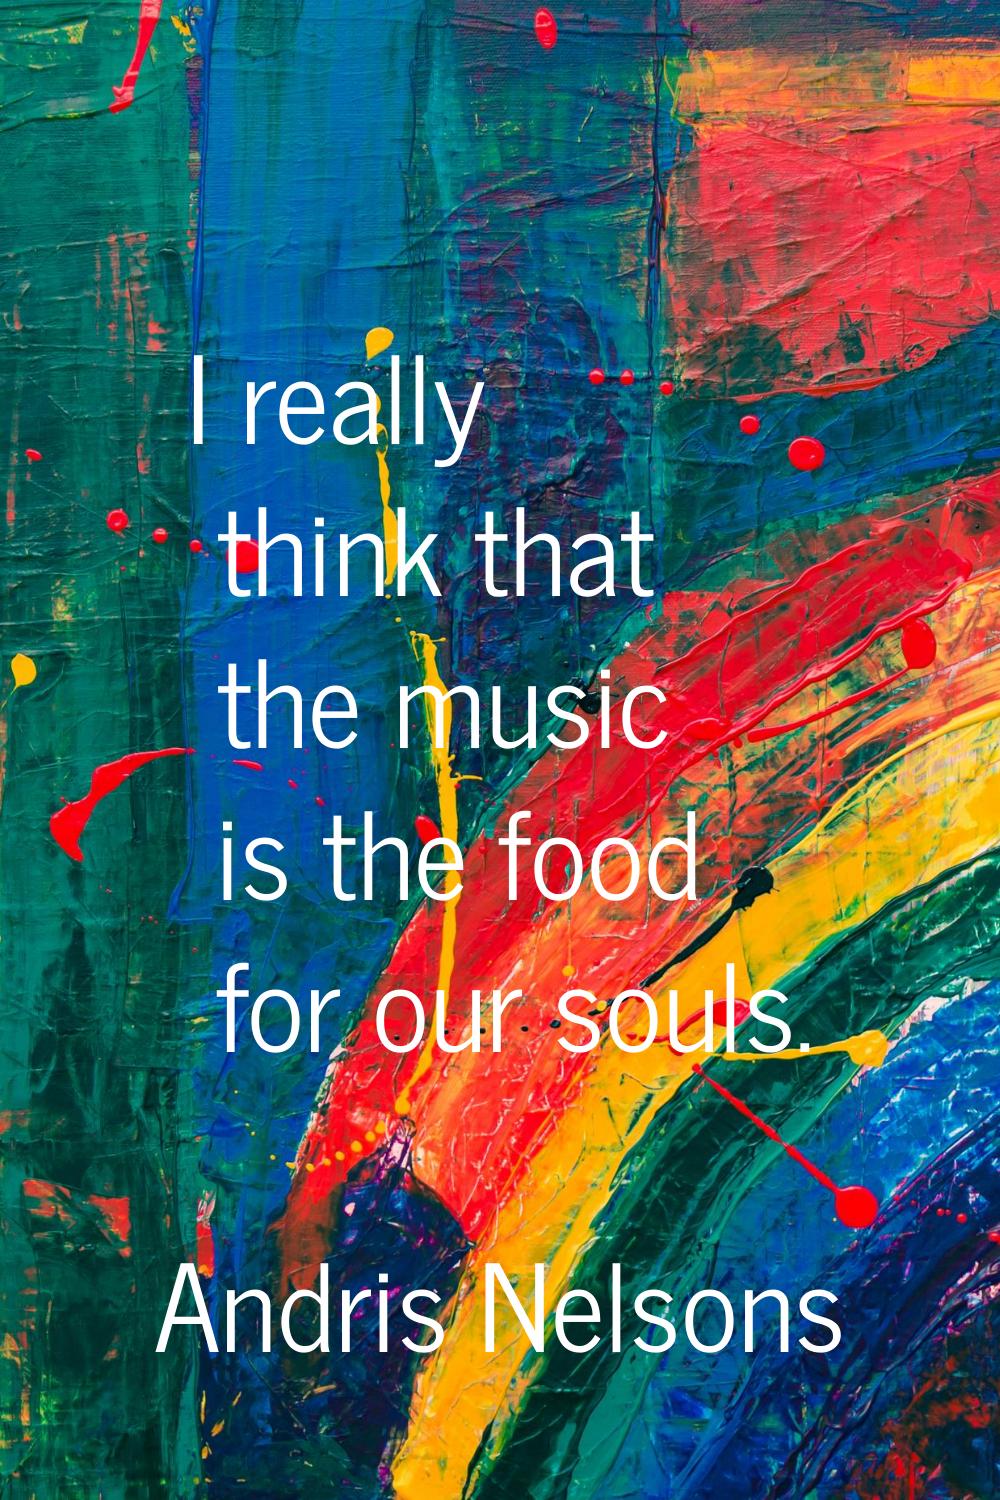 I really think that the music is the food for our souls.